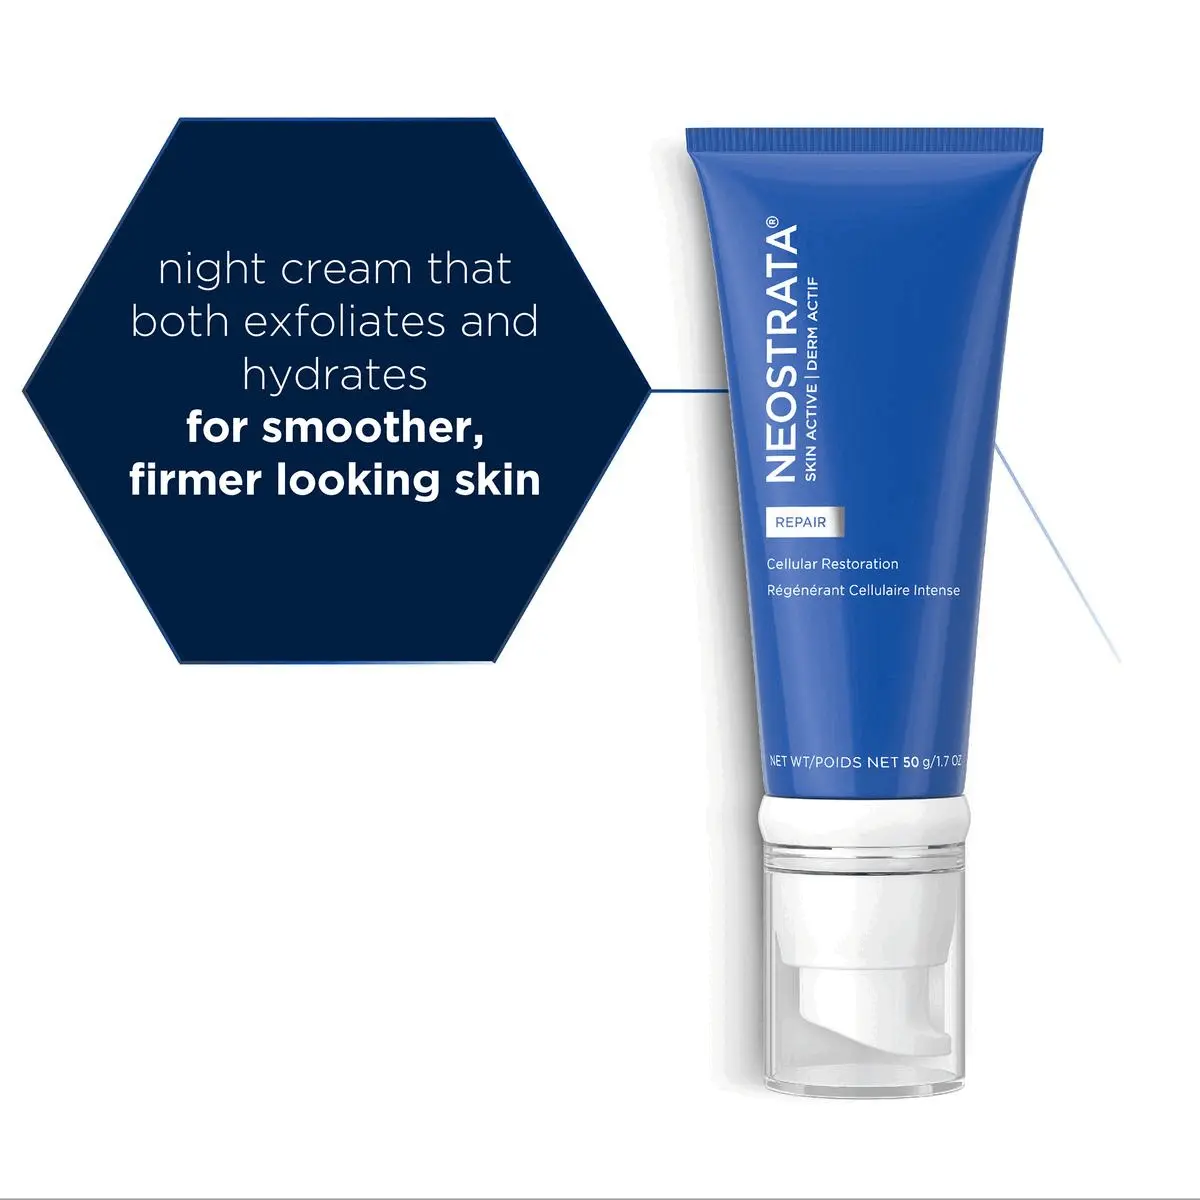 Image 1, night cream that both exfoliates and hydrates for smoother, firmer looking skin Image 2, Product shot Image 3, How to use Image 4, product shot Image 5, gentle foaming deep cleanser ideal for dry, normal and oily skin Image 6, How to use Image 7, the regimen